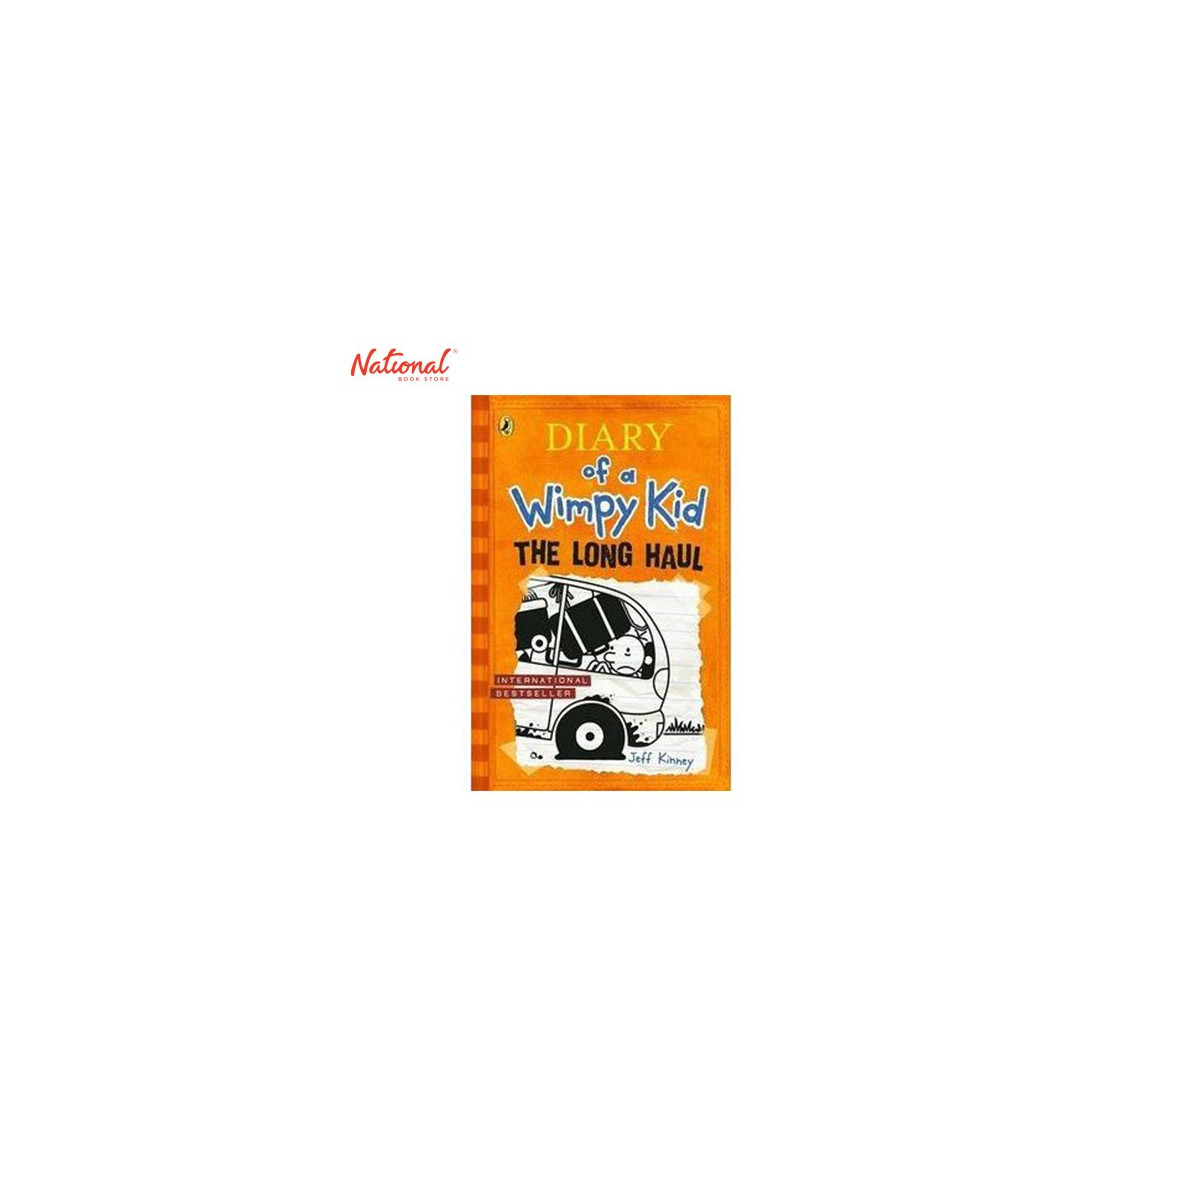 DIARY OF A WIMPY KID9 LONG HAUL